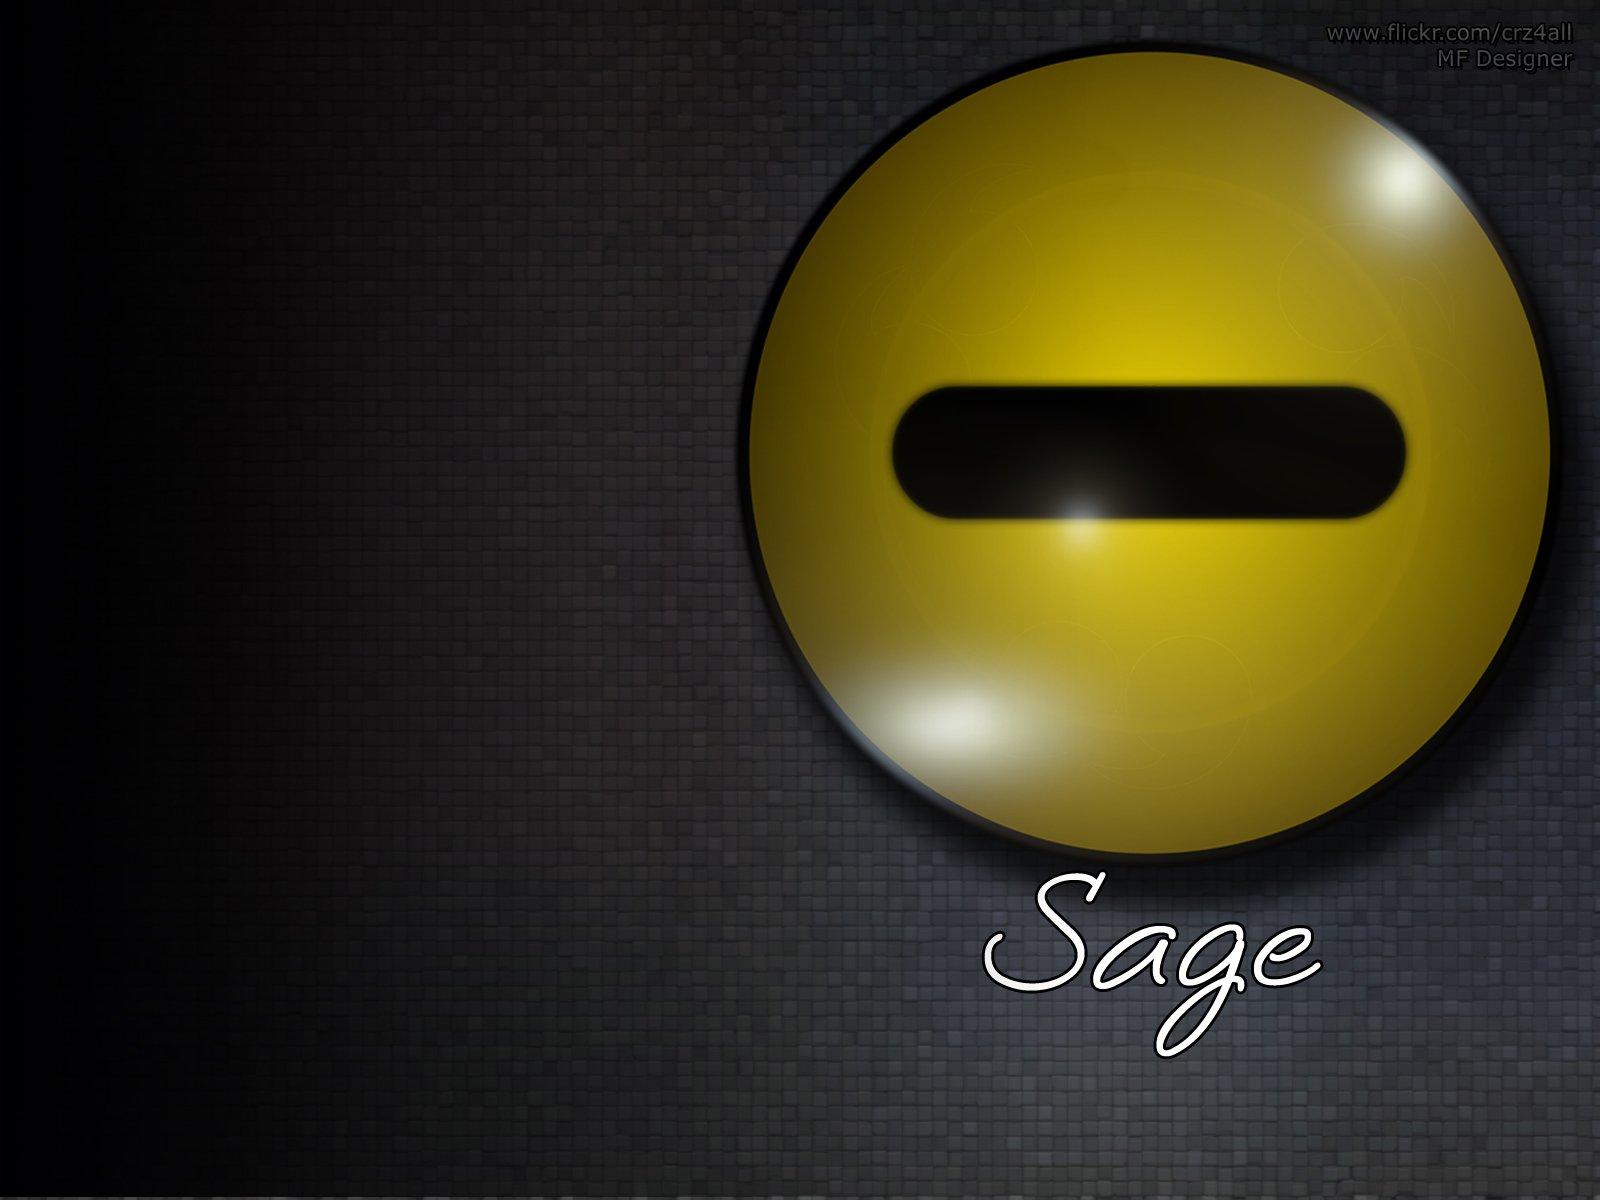 Sage mode Wallpaper and Background Imagex1200